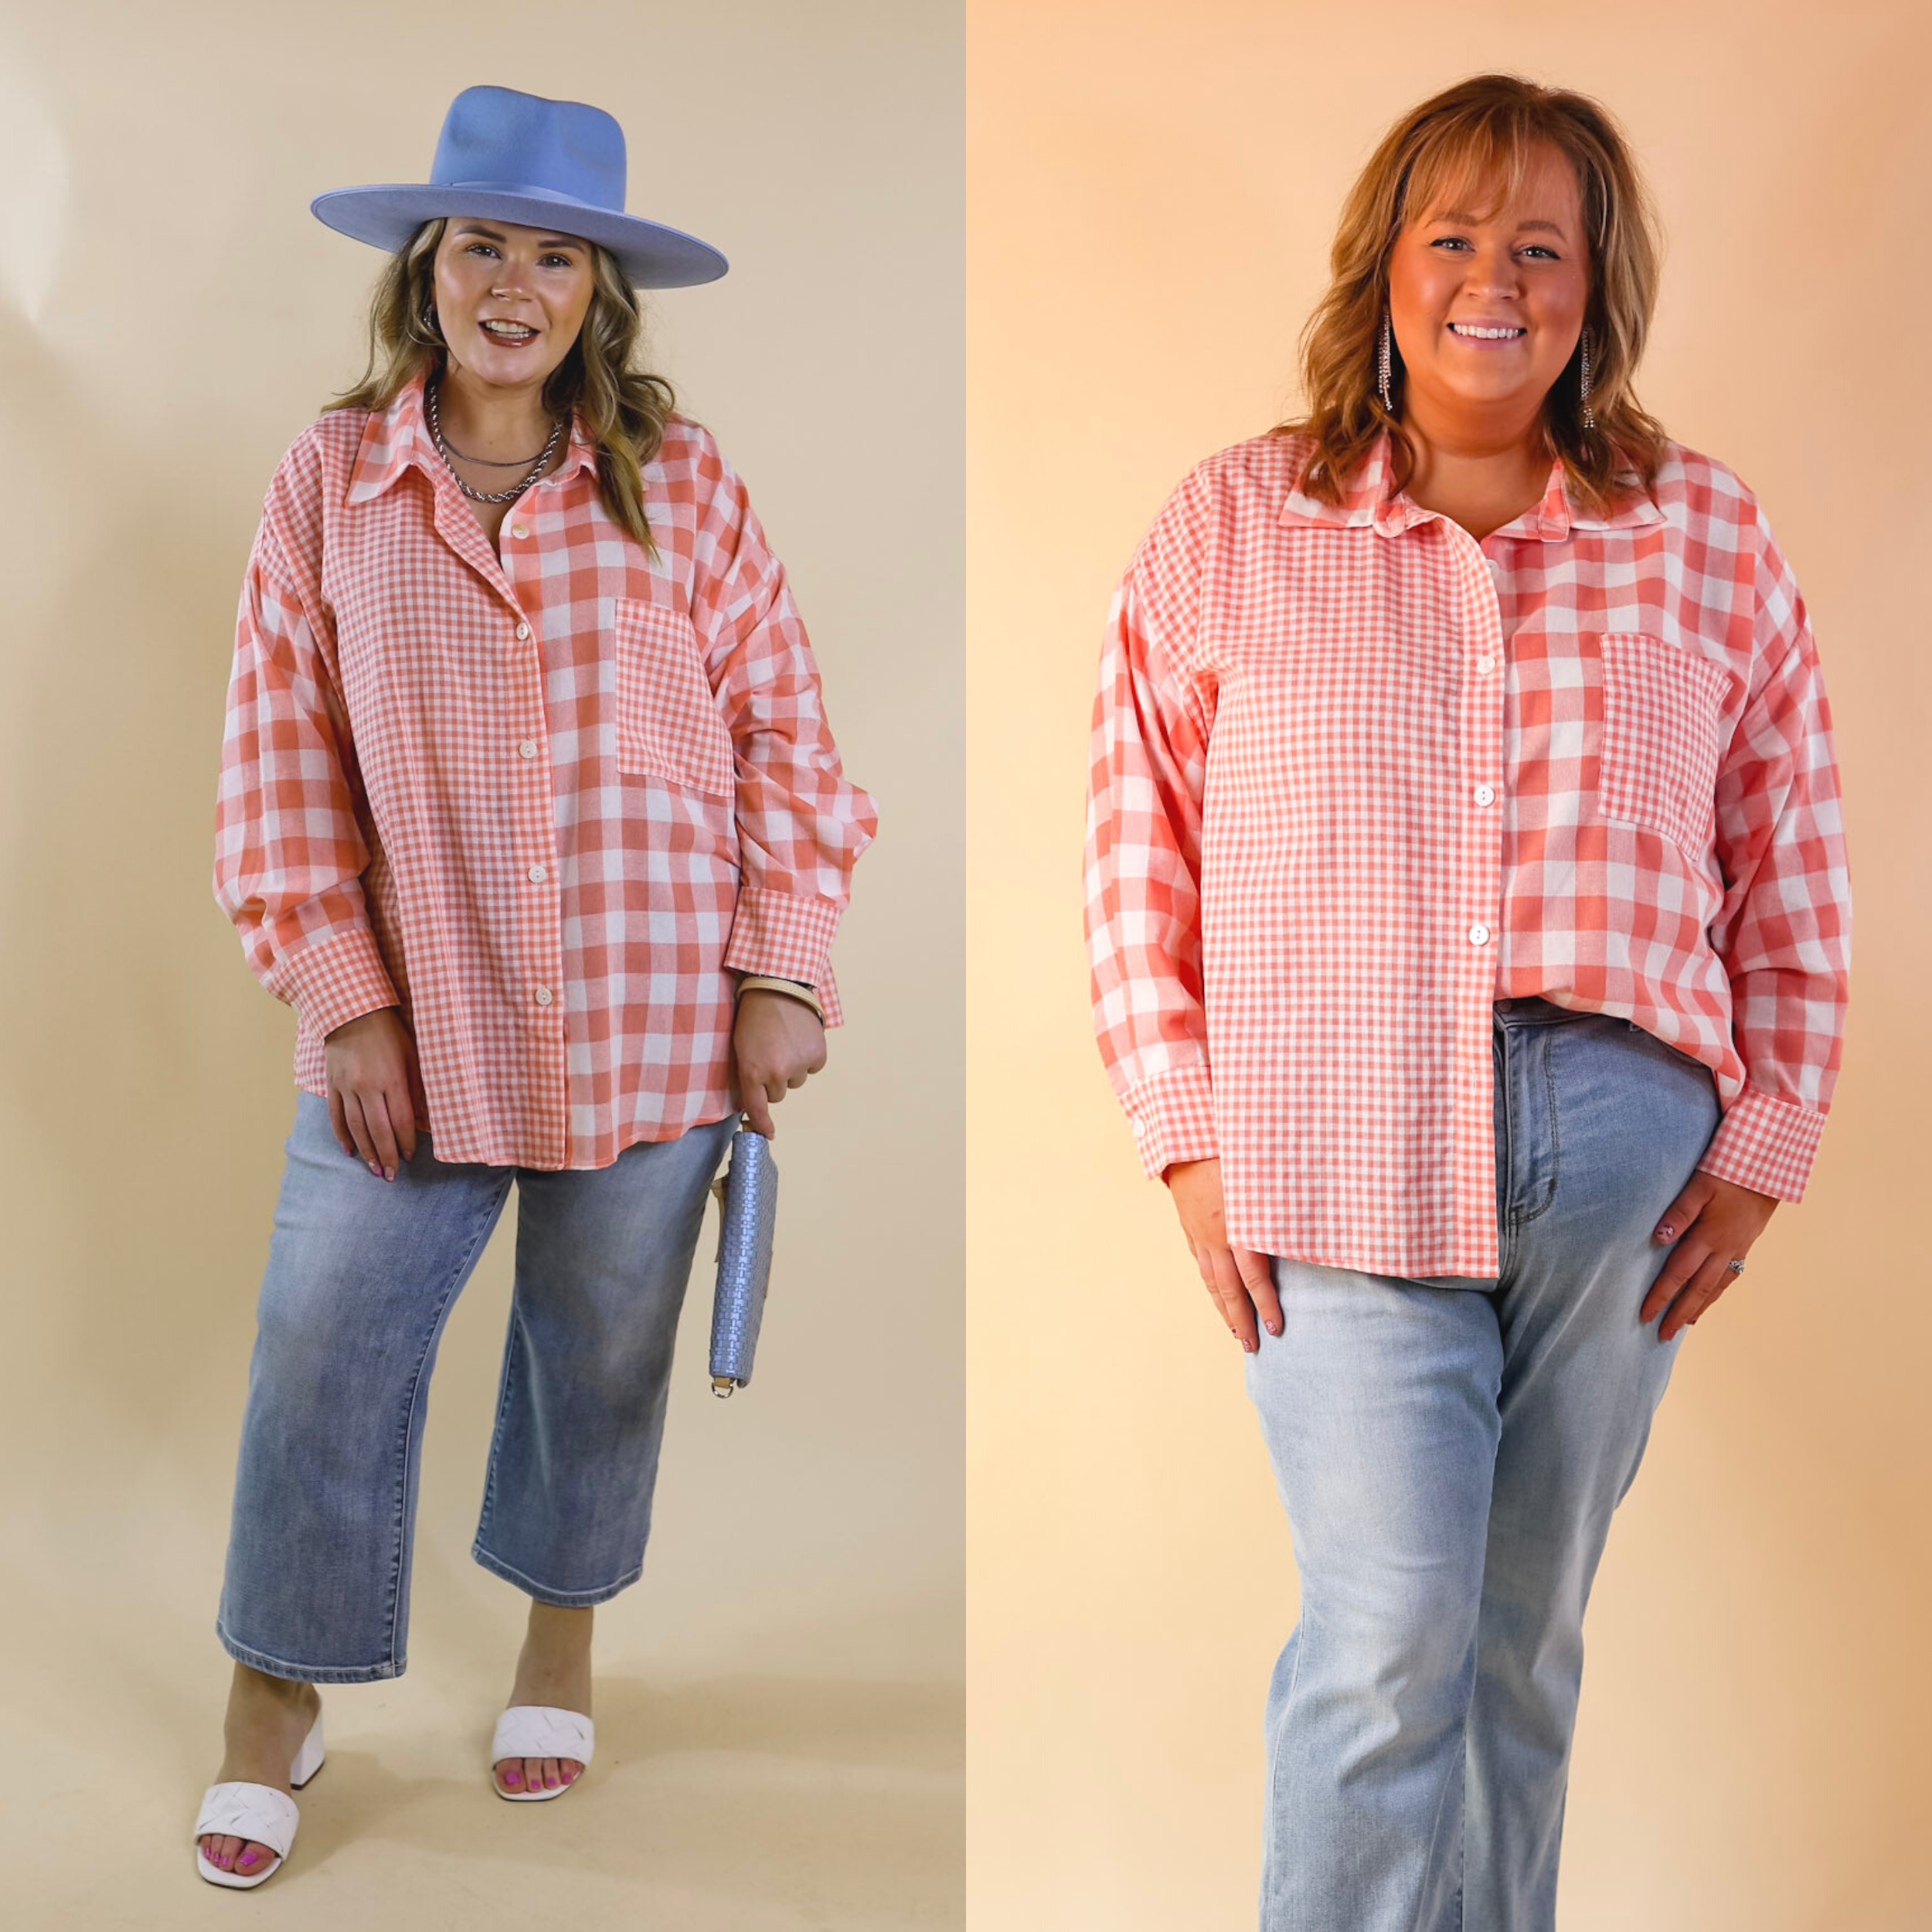 Waiting For You Mix Plaid Button Up Top in Coral Orange - Giddy Up Glamour Boutique